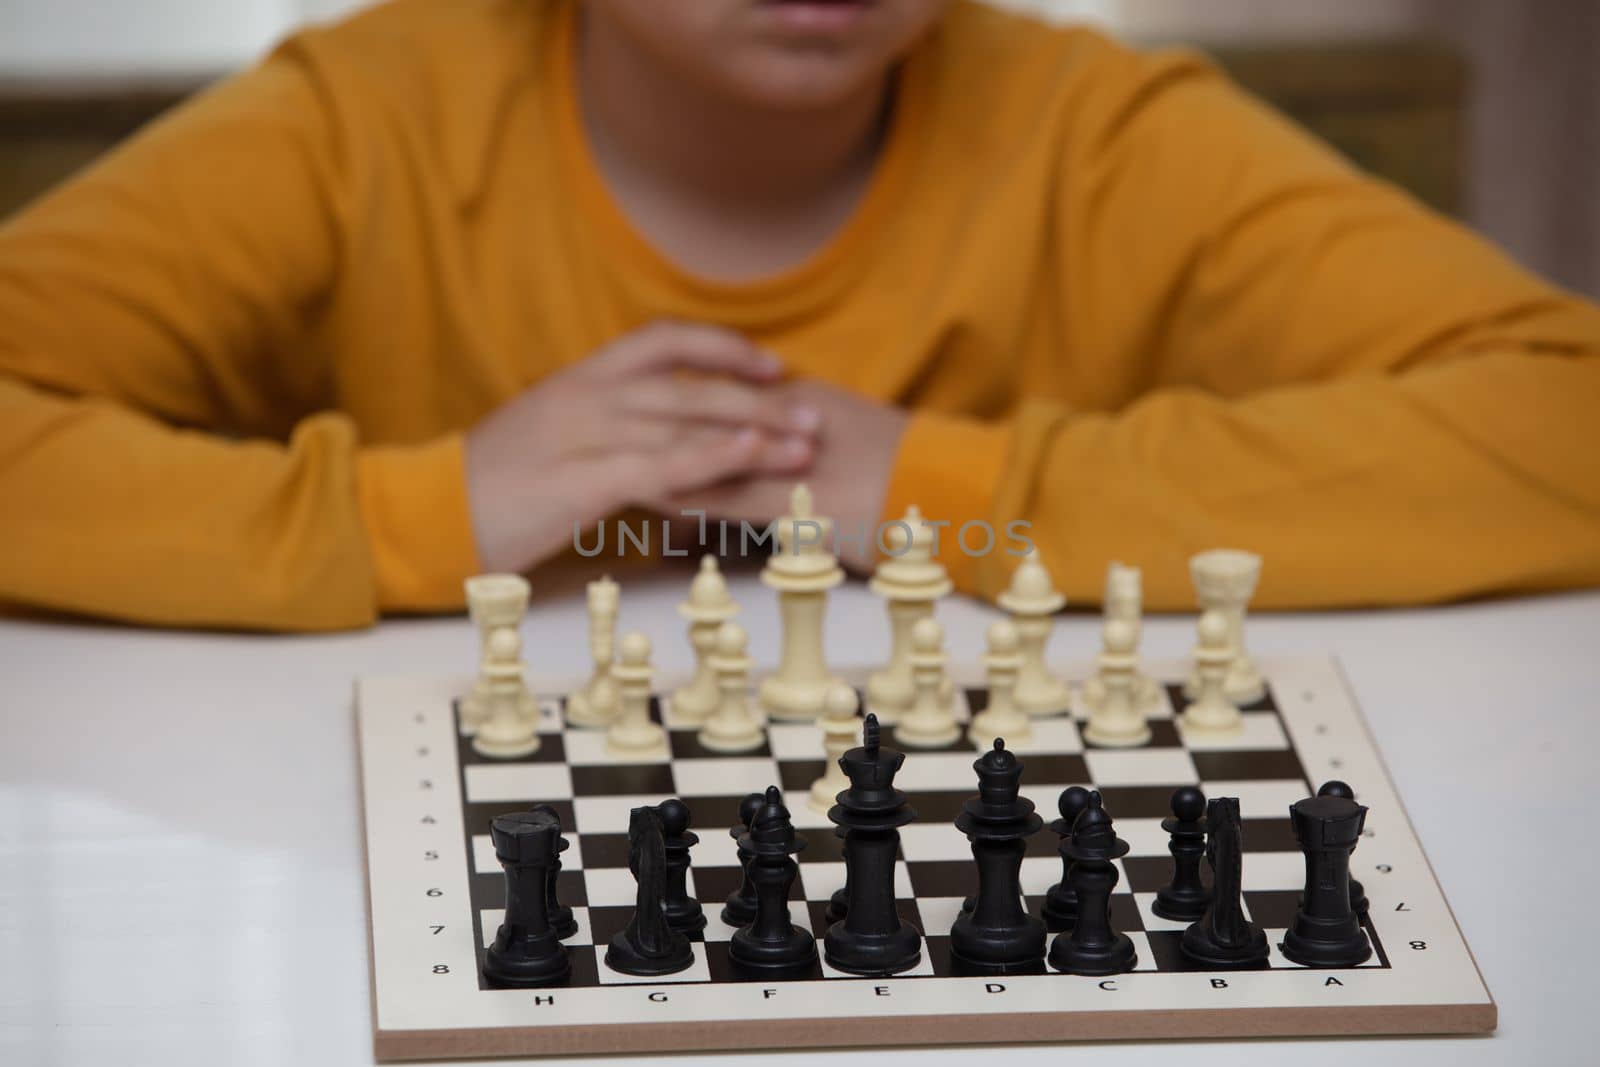 sits at a table and plays chess. The kid concentrated on the game and thinks where to make his next move. Early development, home educational games for children by senkaya